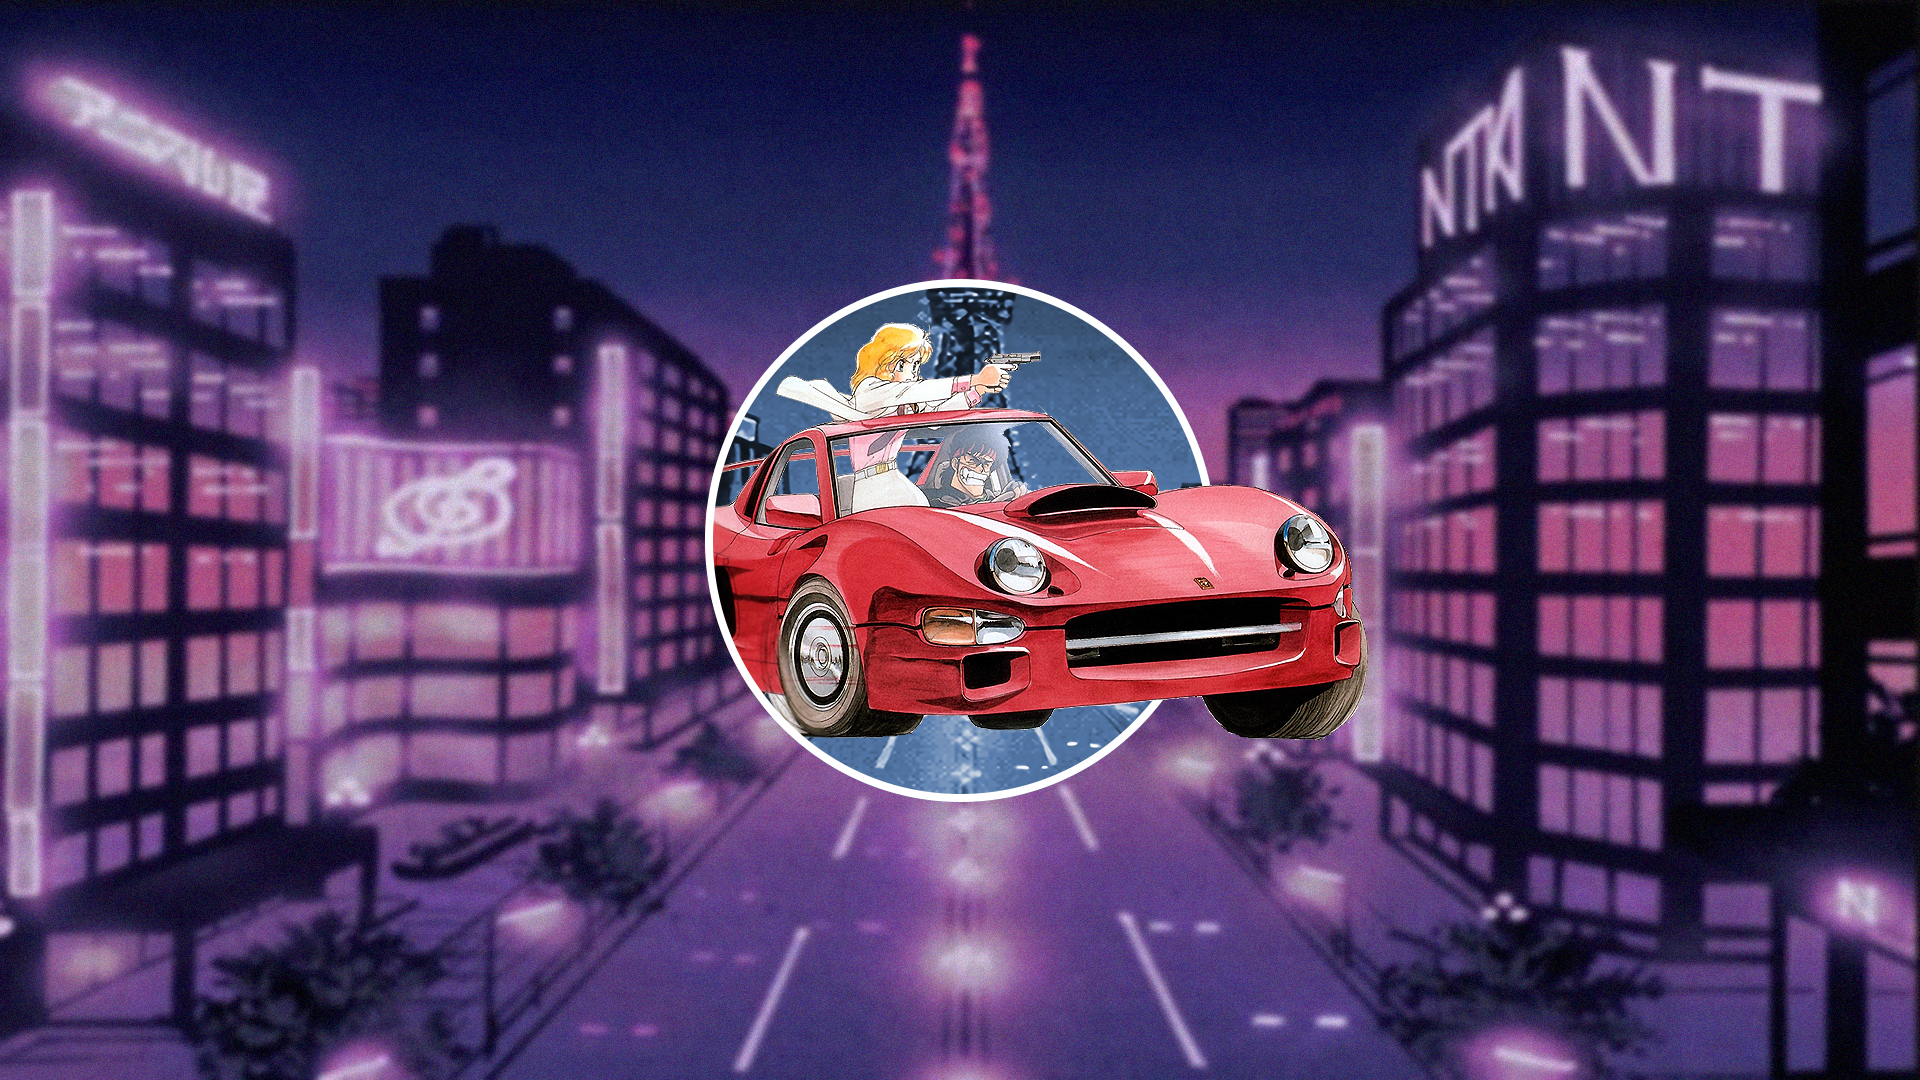 Picture In Picture Piture In Picture Anime Girls Anime Car Red Cars 1920x1080